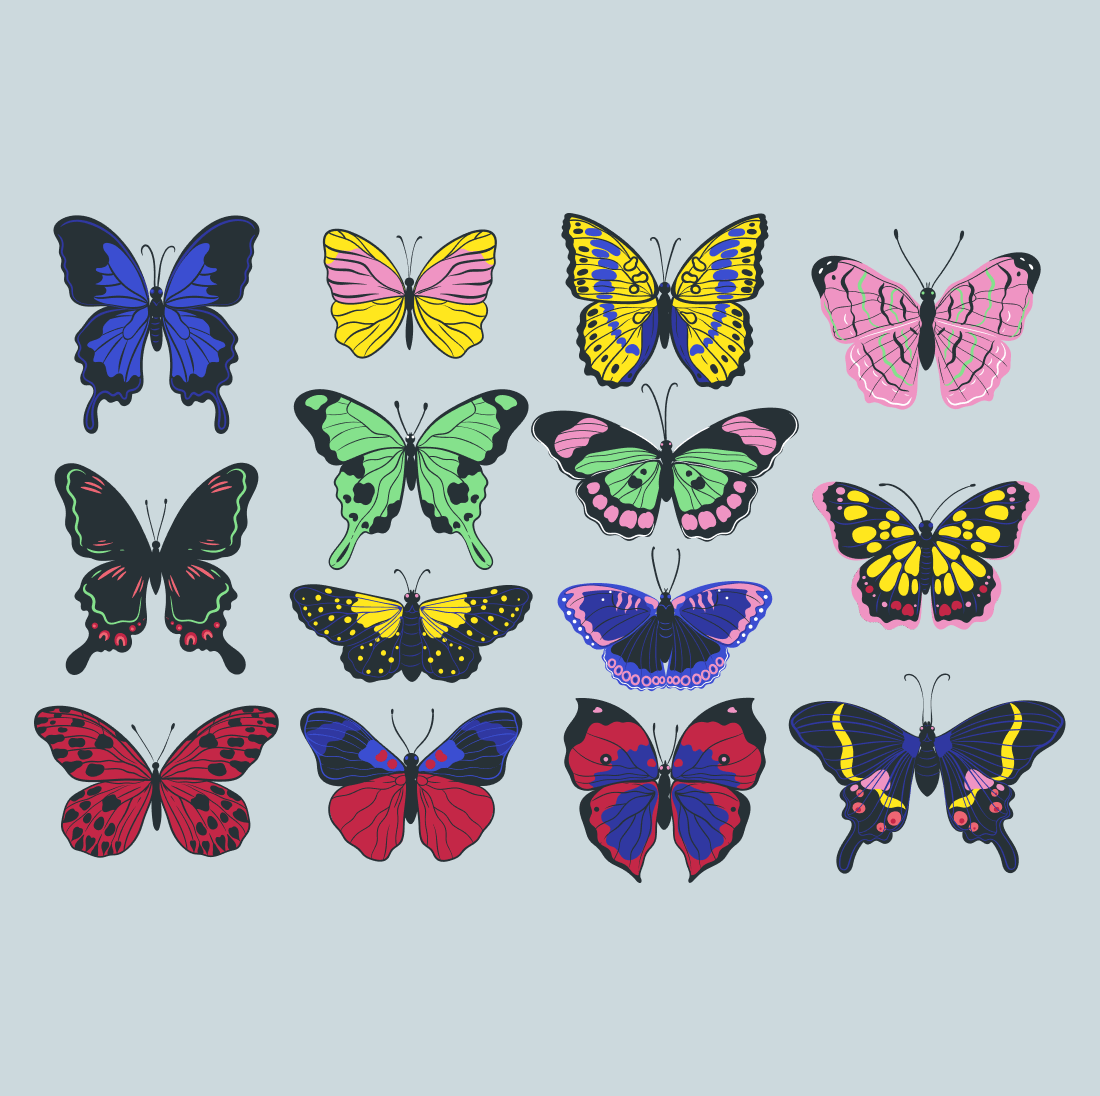 Group of colorful butterflies on a blue background.